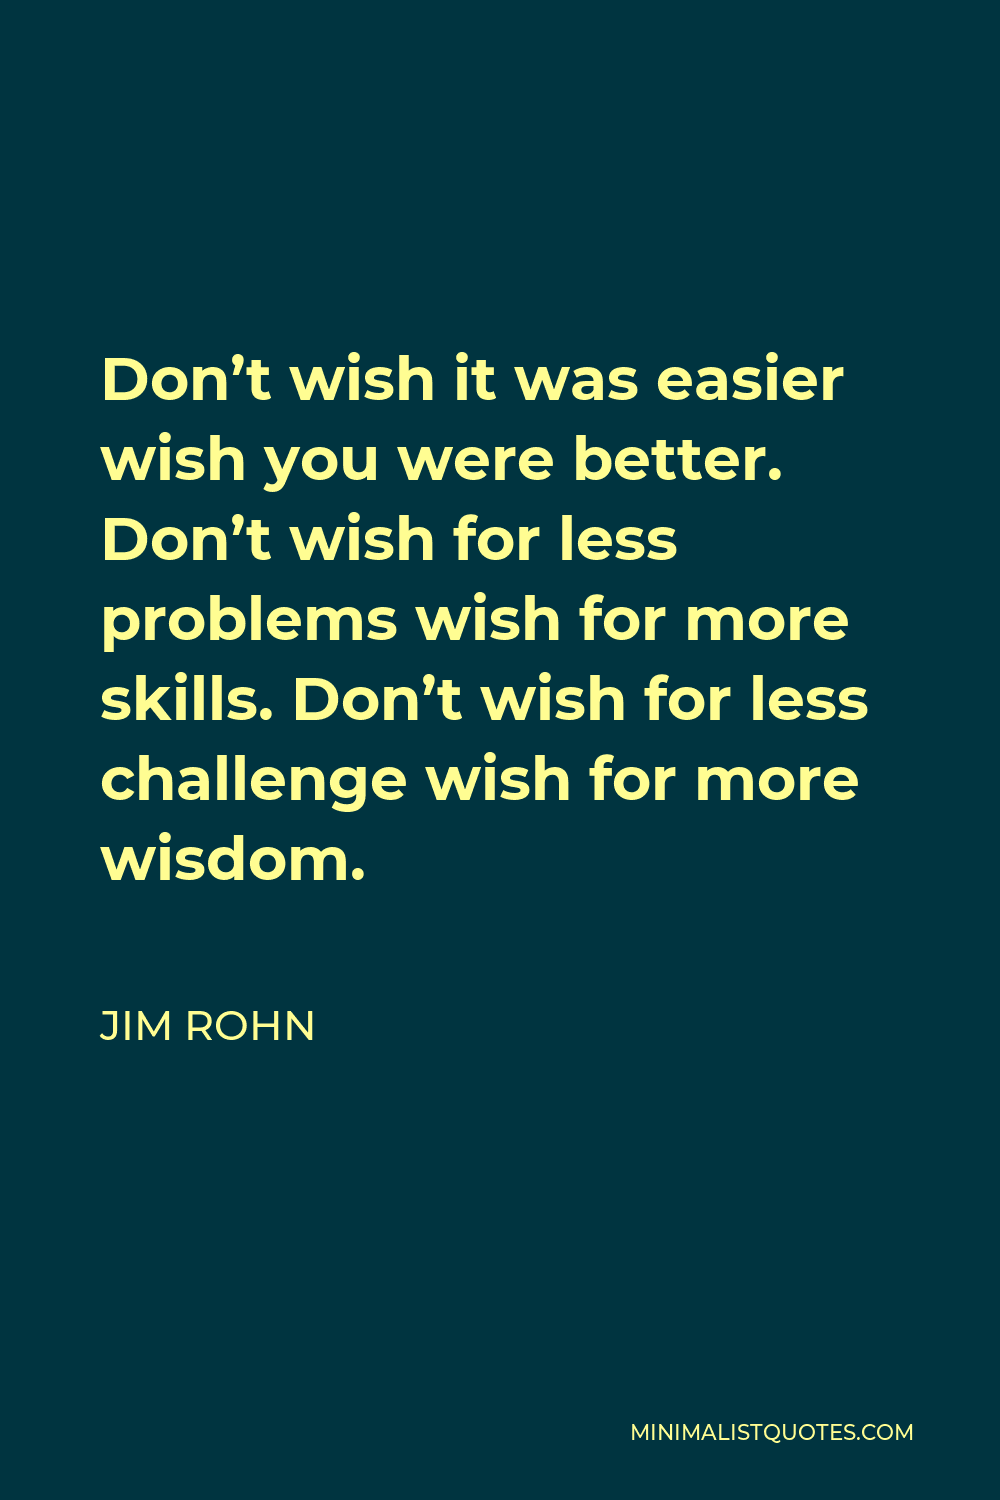 Jim Rohn Quote - Don’t wish it was easier wish you were better. Don’t wish for less problems wish for more skills. Don’t wish for less challenge wish for more wisdom.